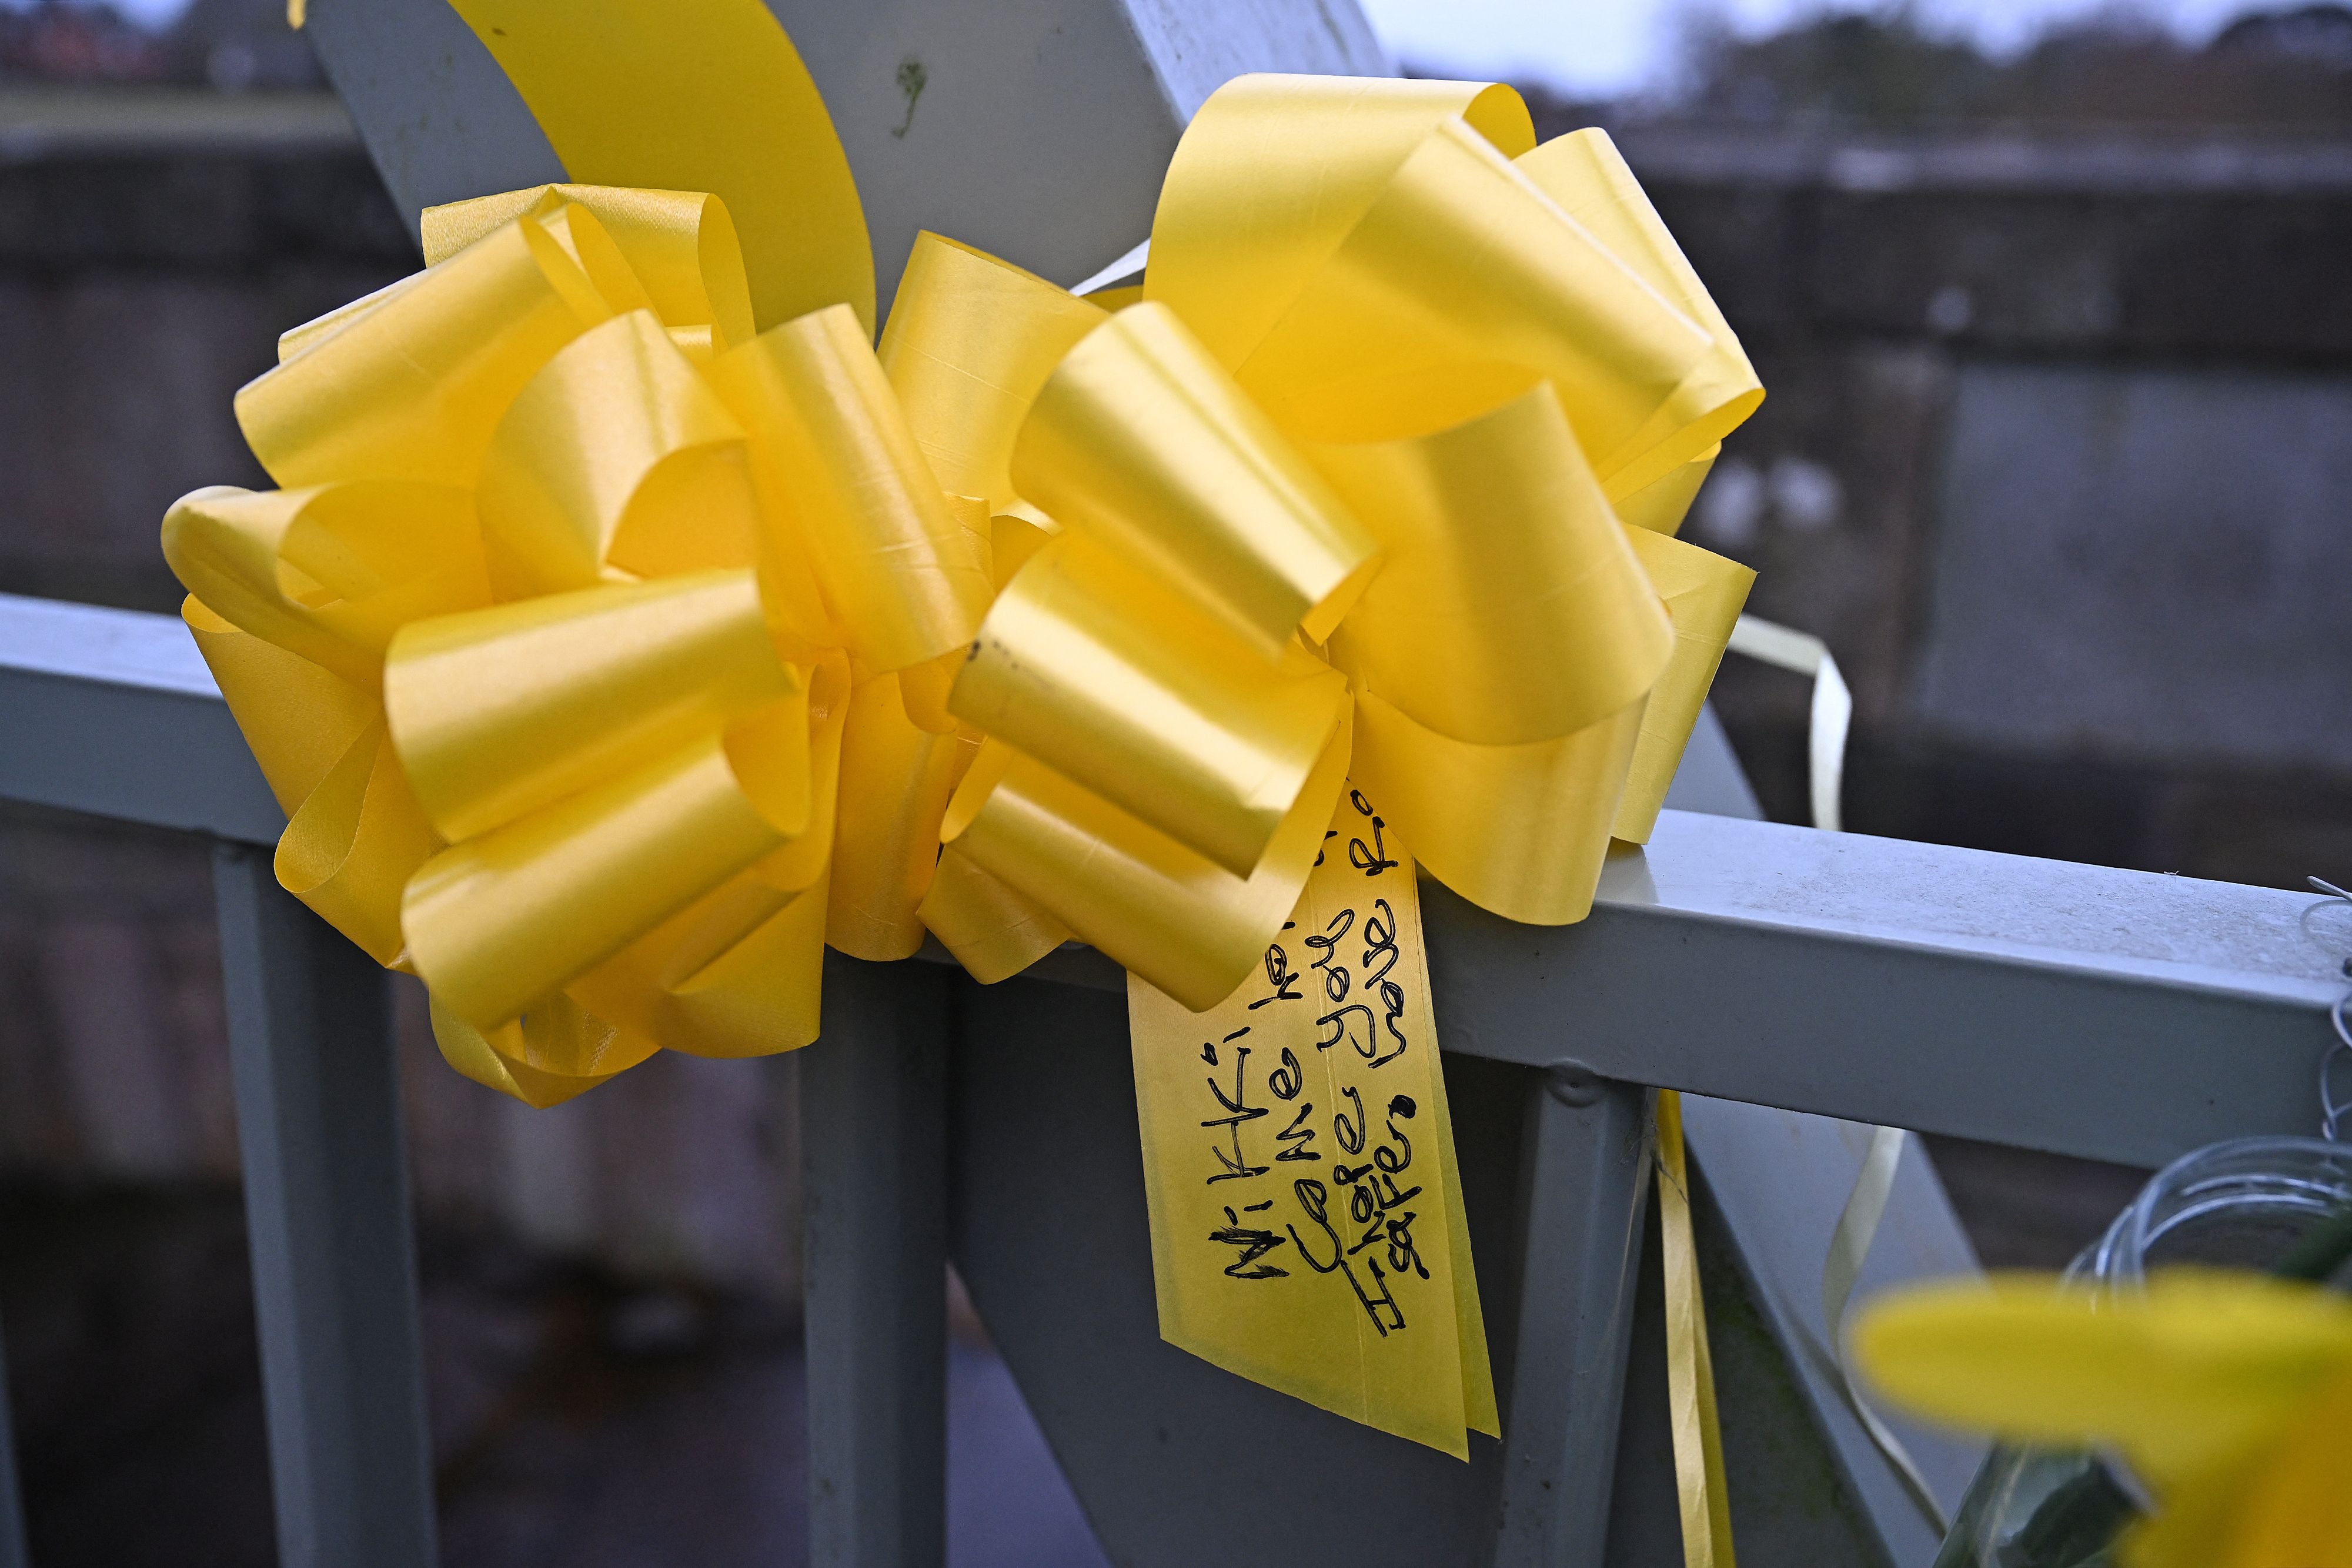 Daffodils and yellow ribbons with messages for Nicola Bulley